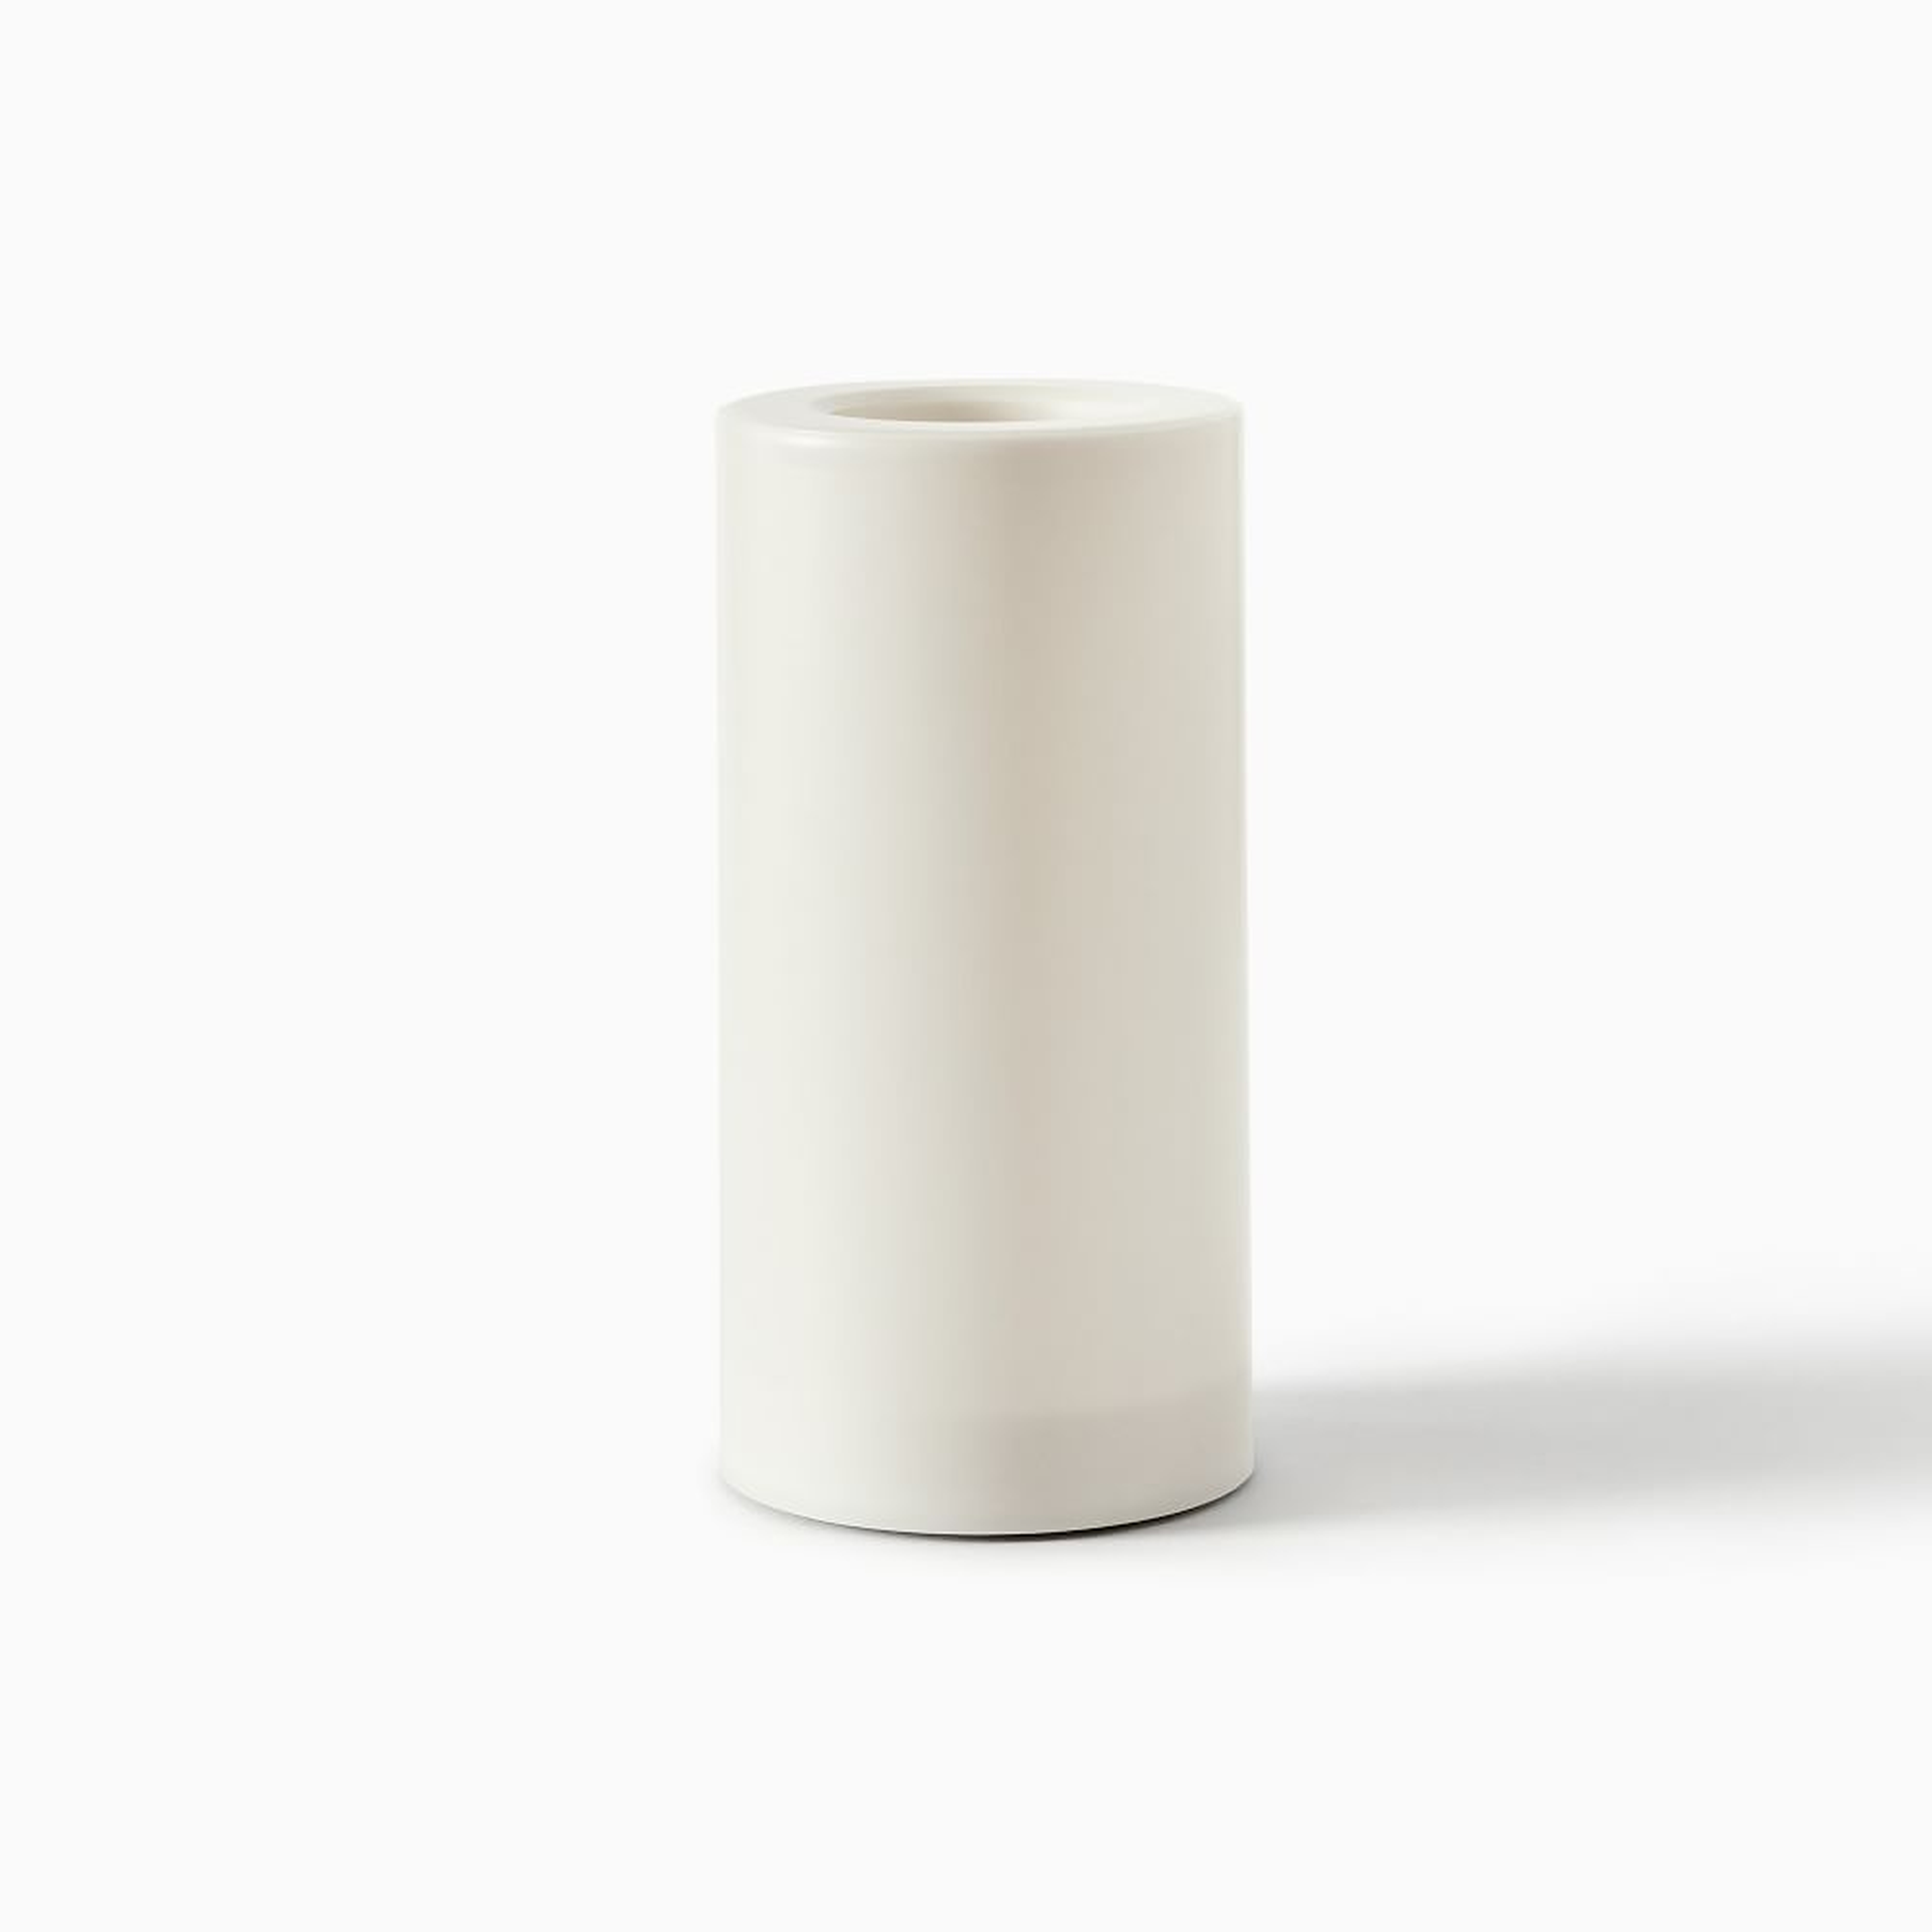 Flat Top Flicker Flameless Basic Candle, 6x12, 1 Wick, Unscented, White - West Elm